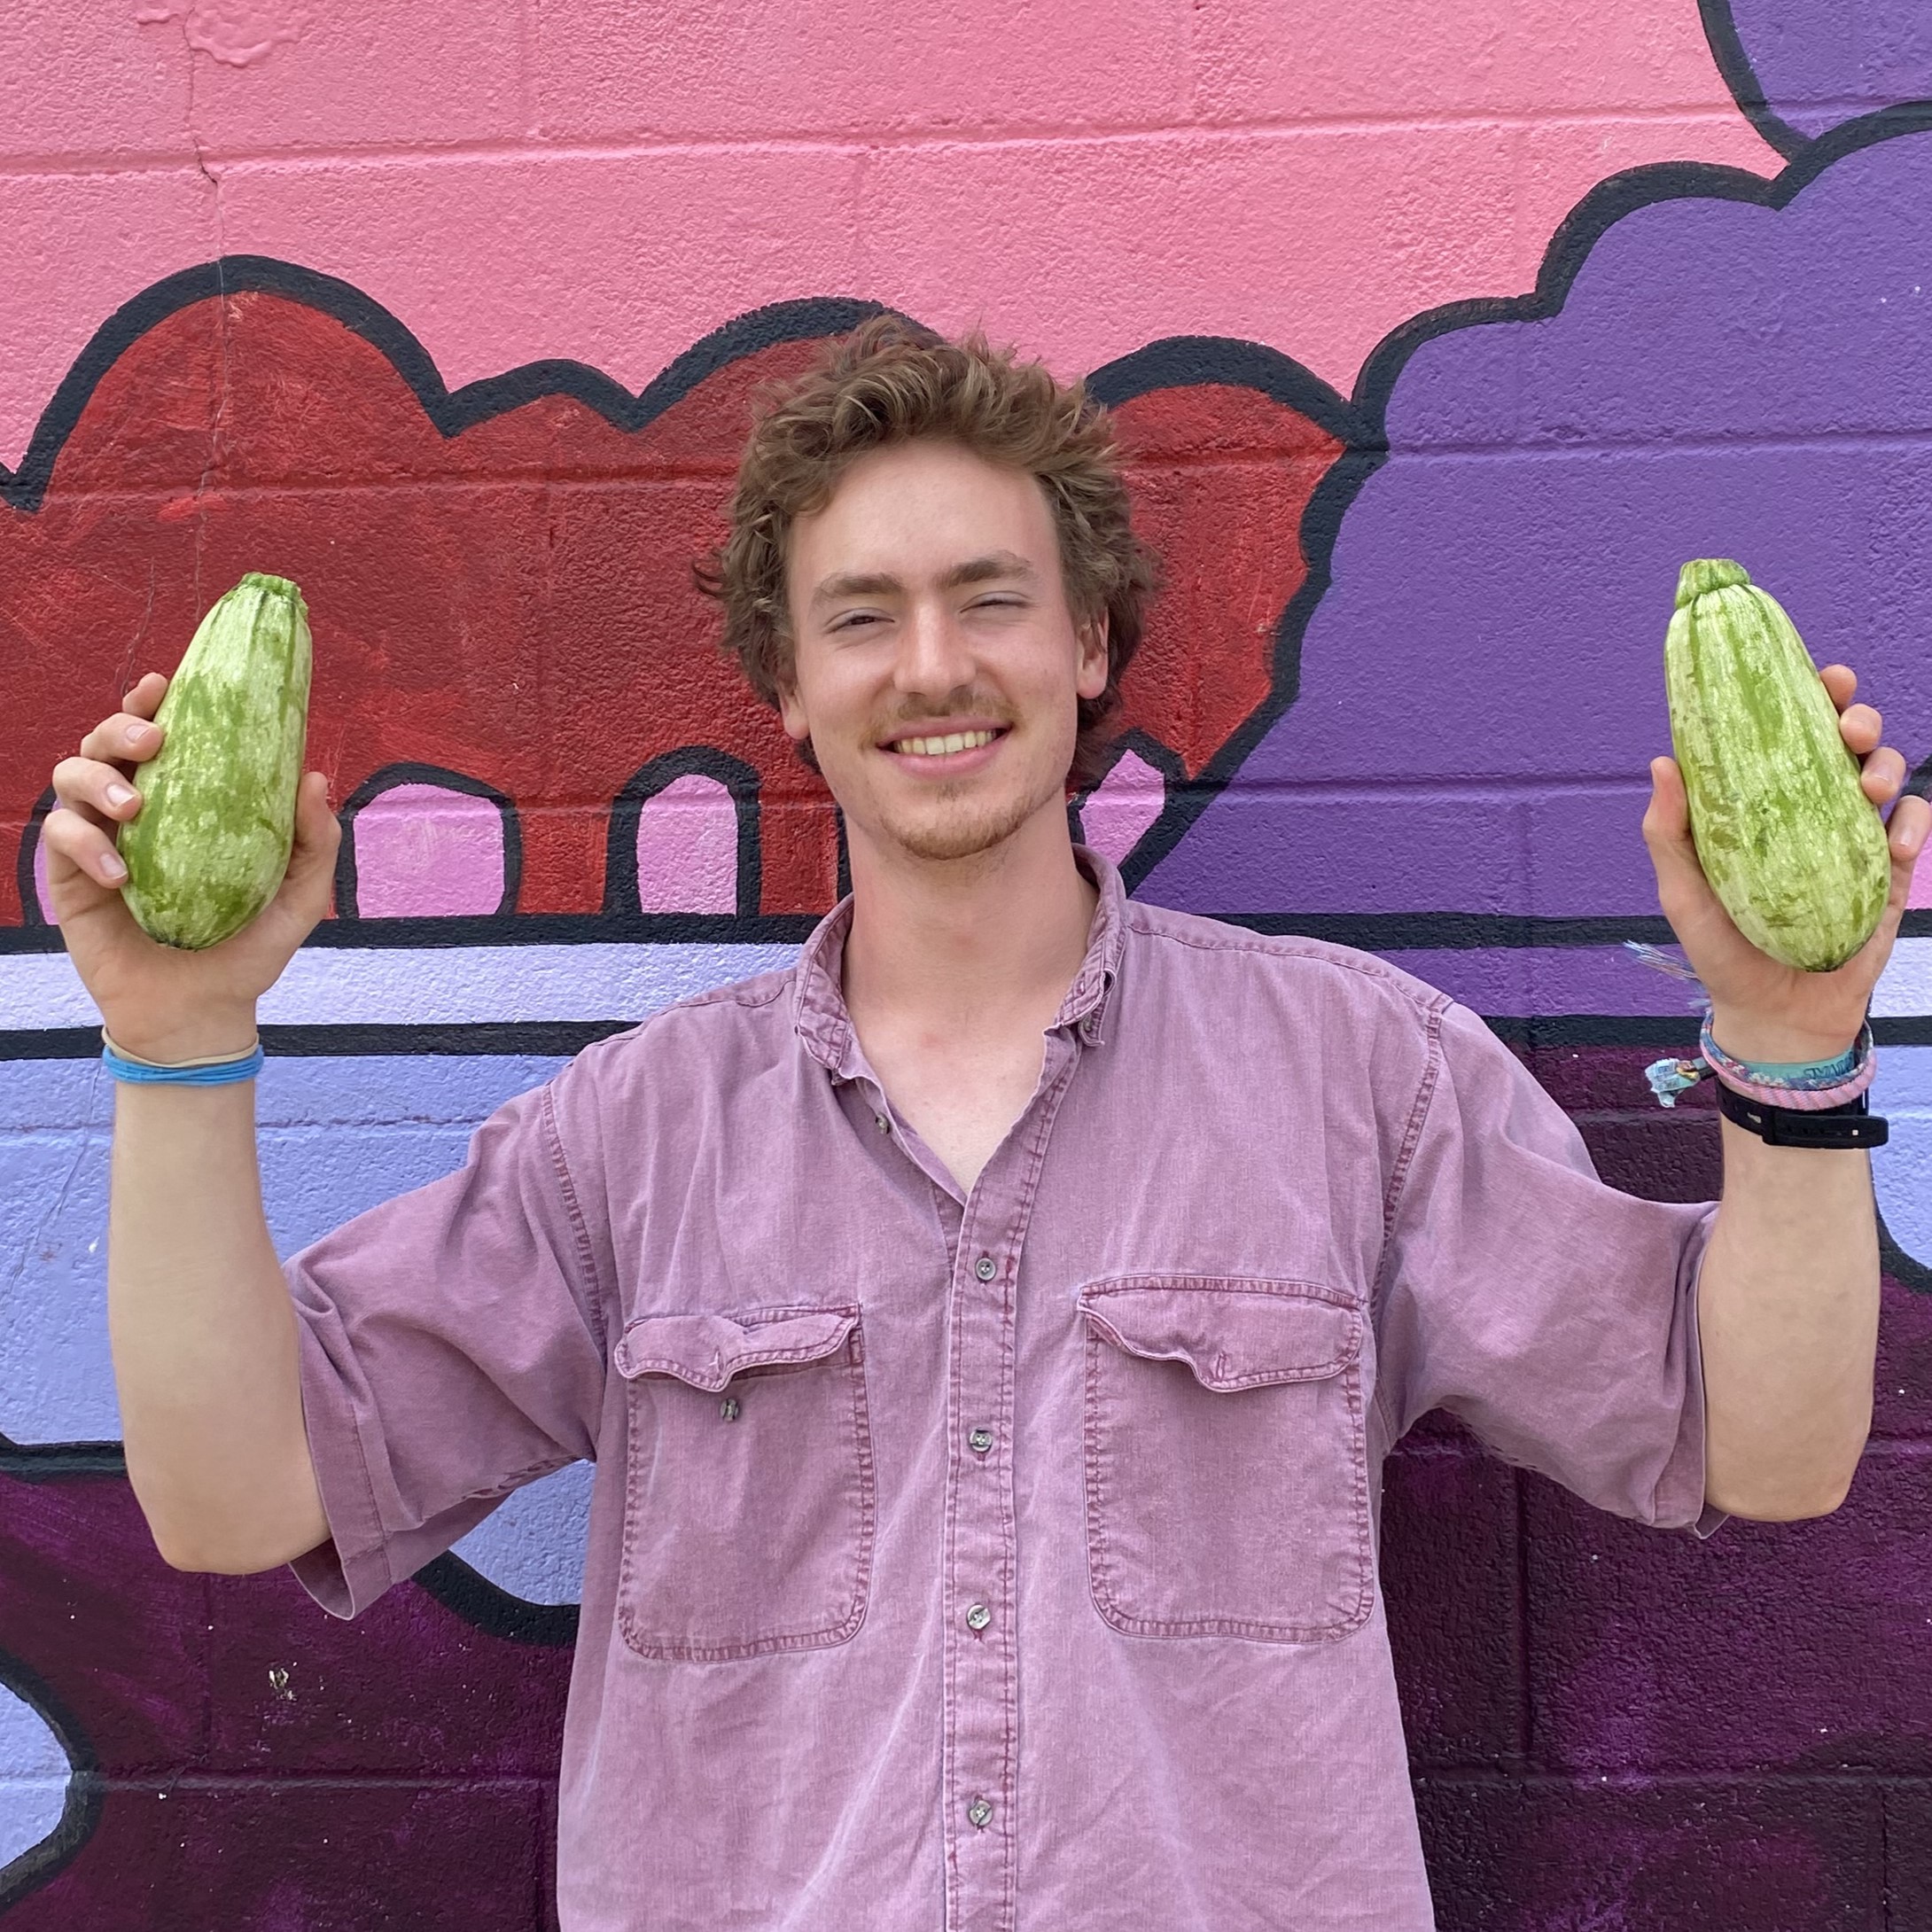 Adam stands against a purple painted mural, holding two green zucchini